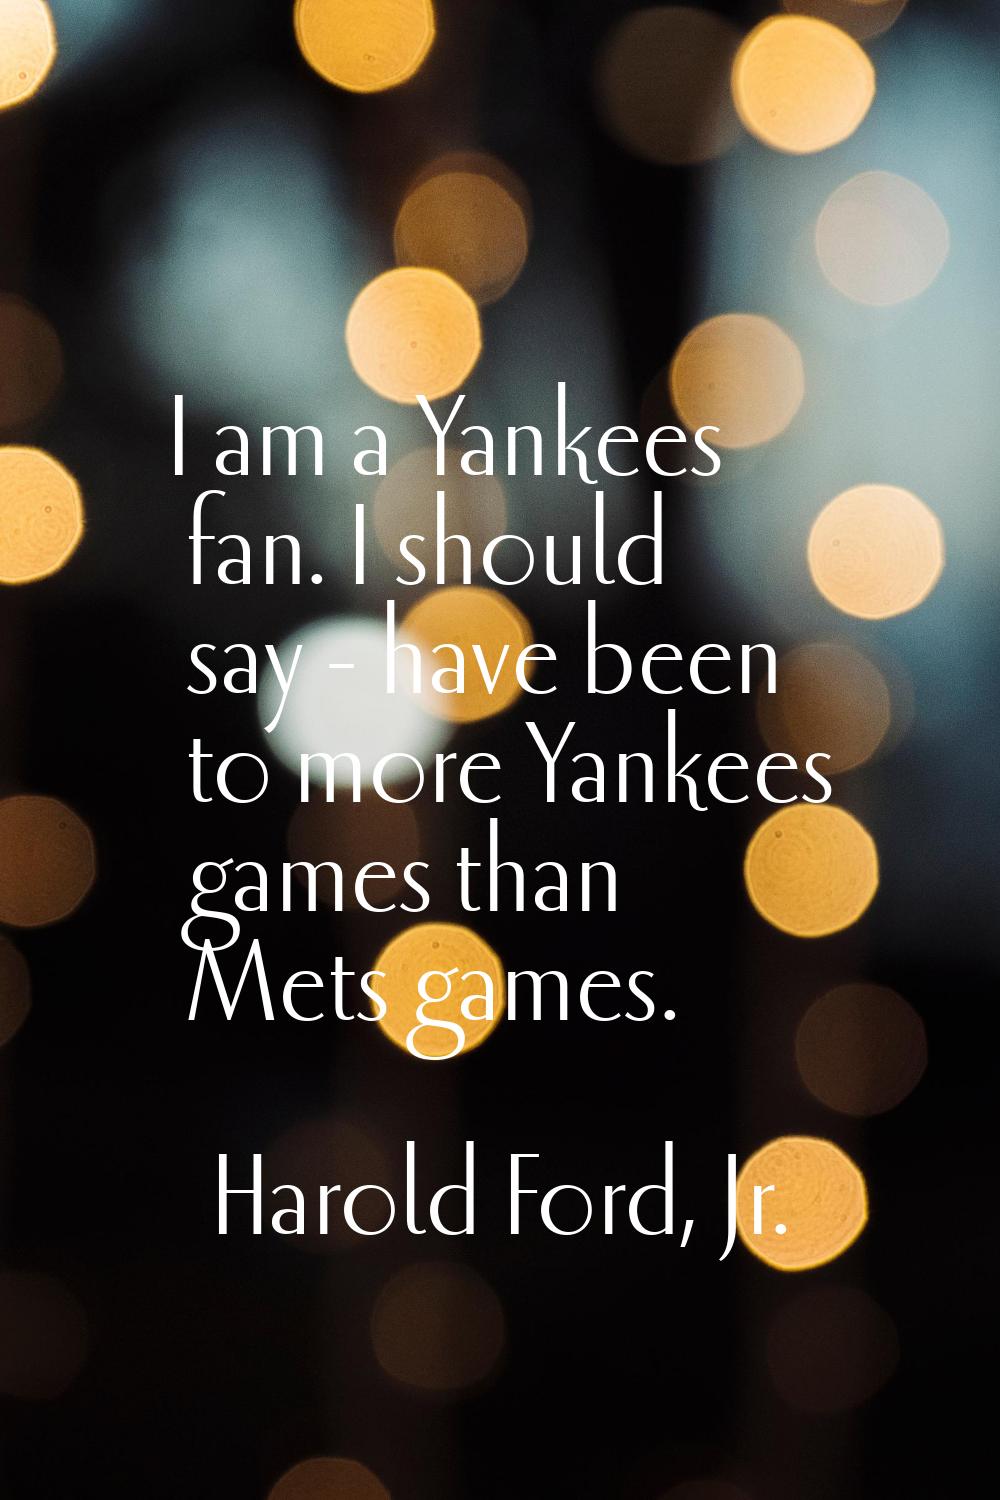 I am a Yankees fan. I should say - have been to more Yankees games than Mets games.